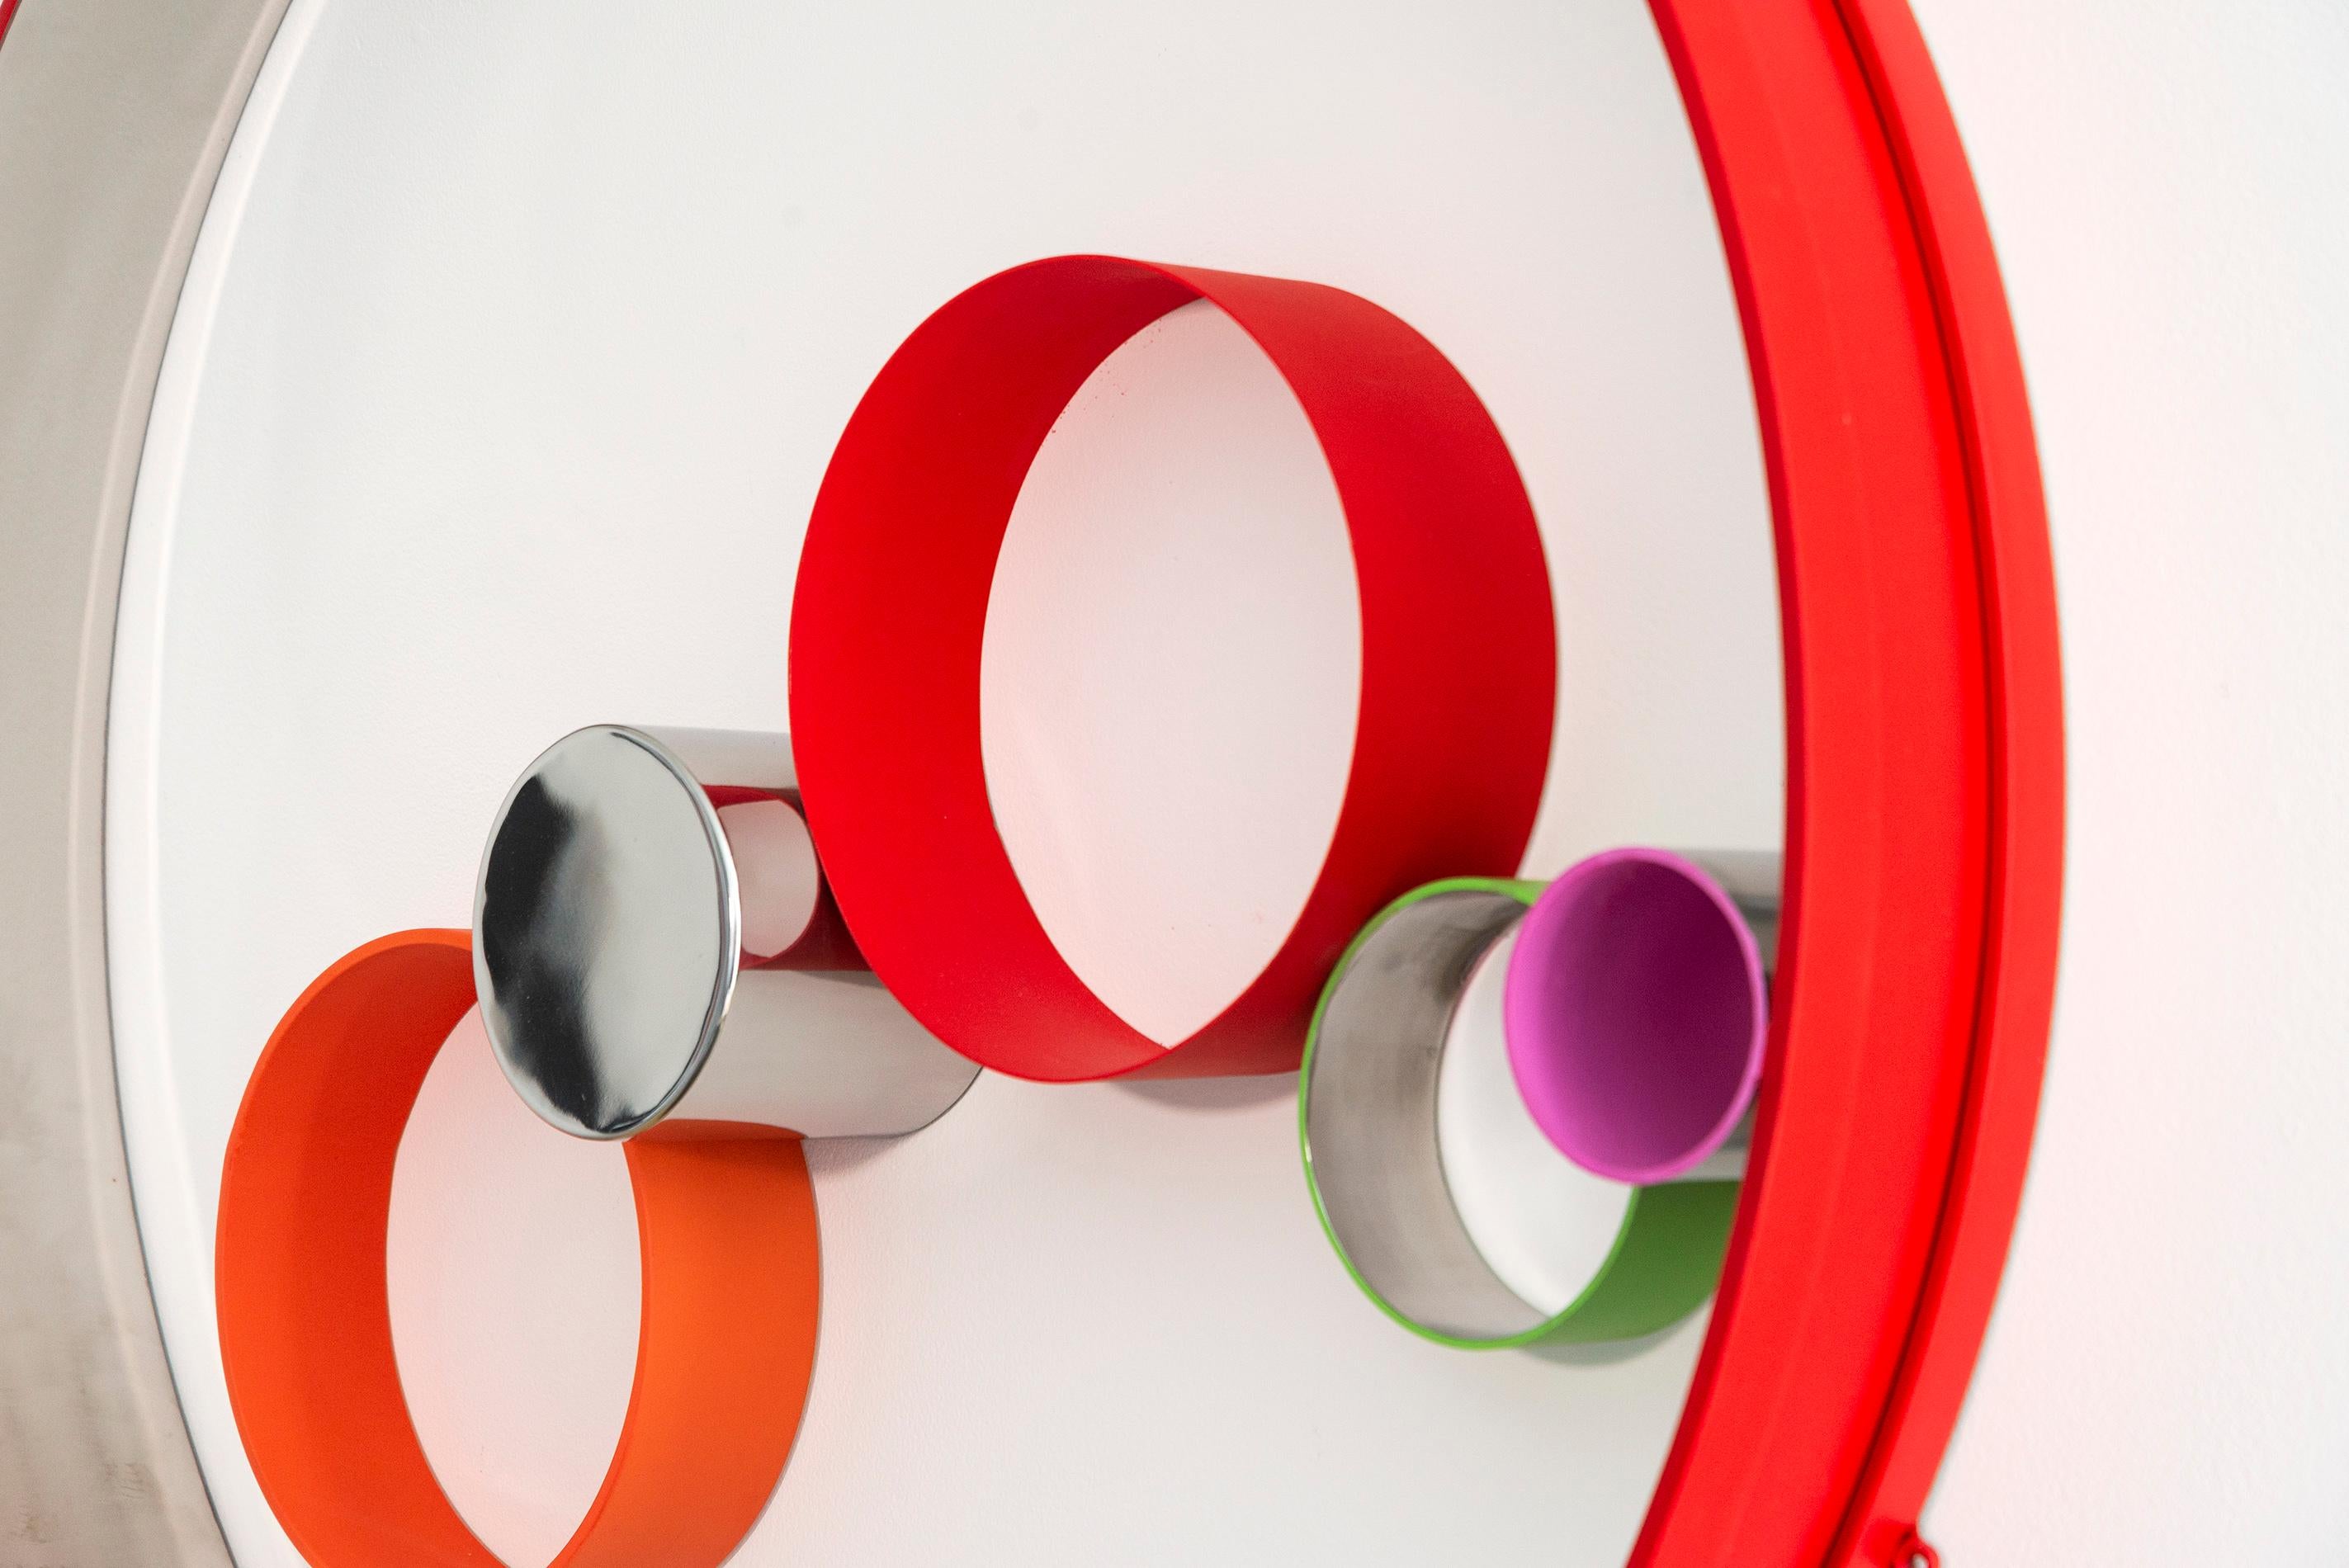 Painted in vivid colours, this intriguing modern metal wall sculpture was hand forged by Philippe Pallafray. Six stainless steel rings of varying sizes—painted in red, orange, yellow, green and pink appear to float inside a large red ring. The